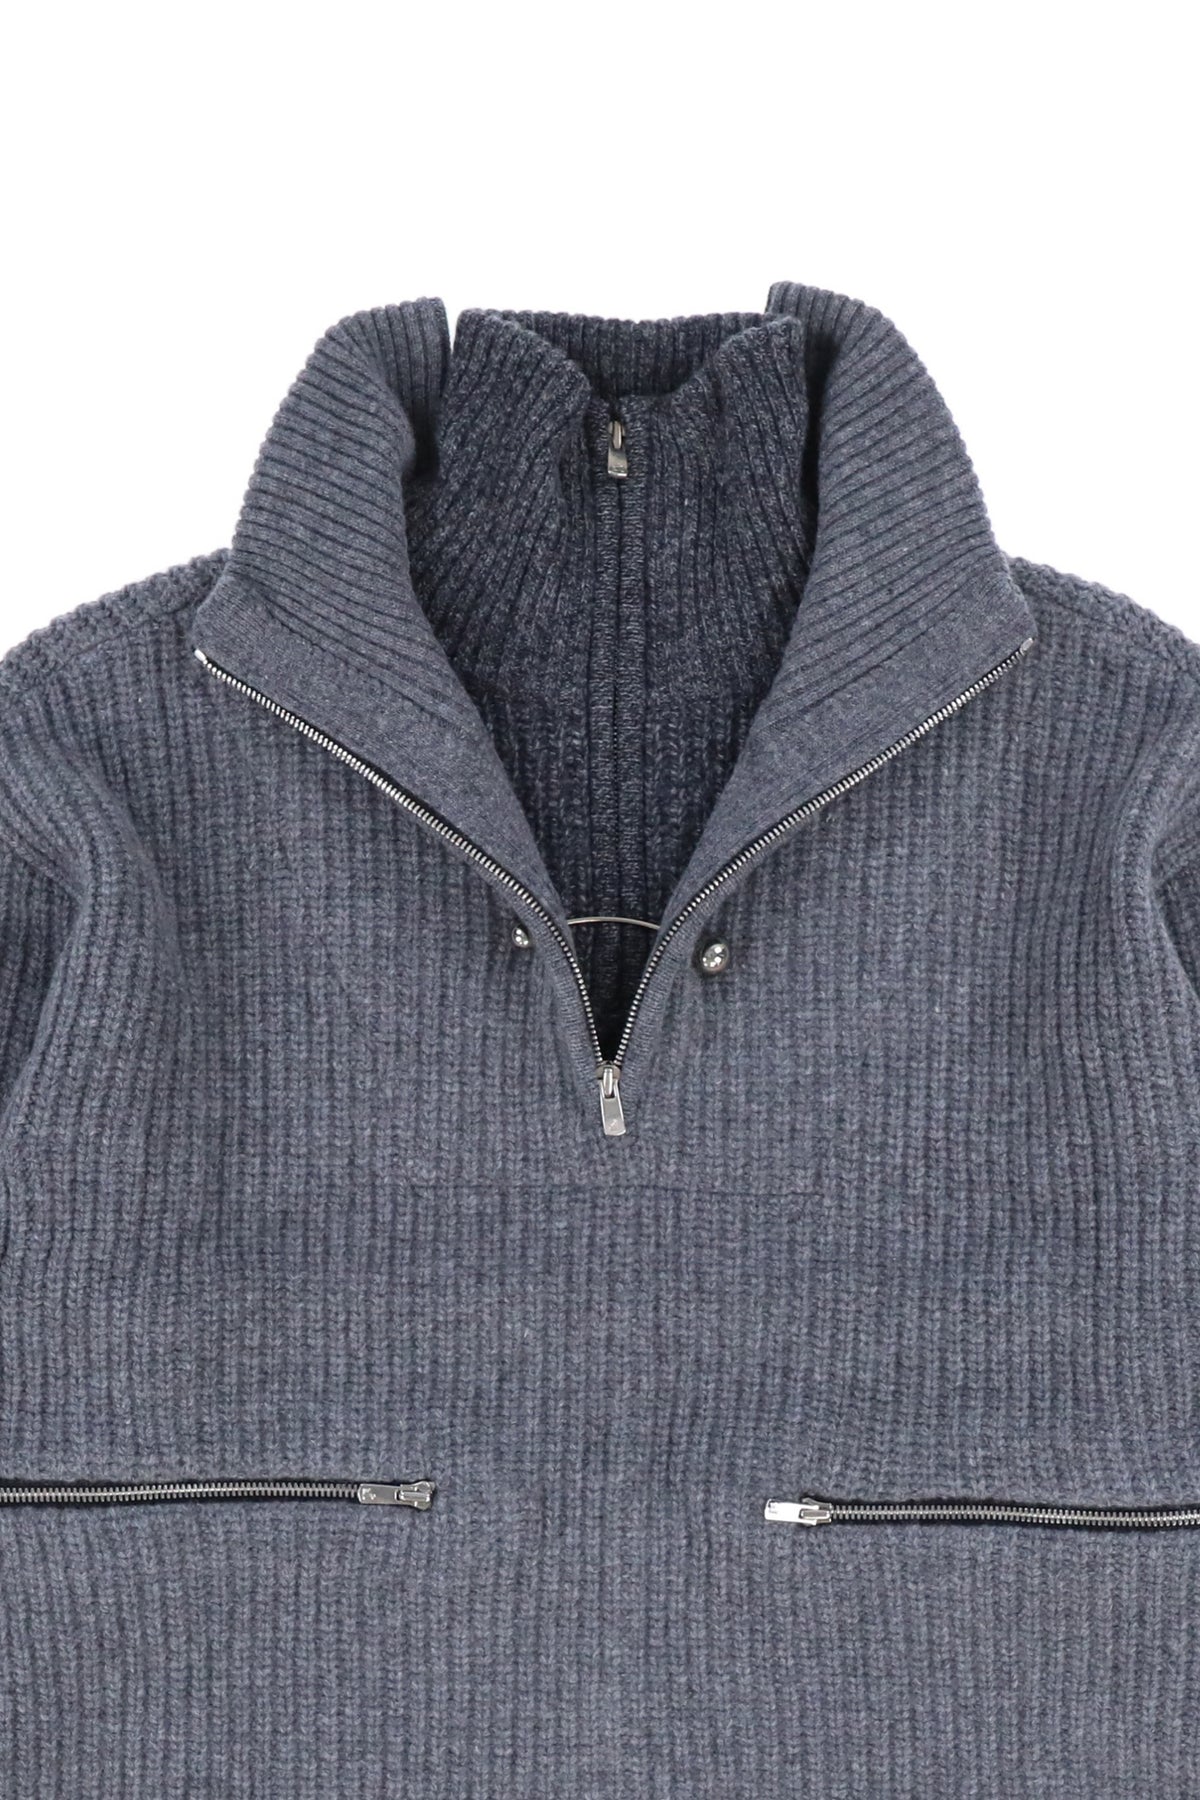 Andersson Bell QUATTRO ZIP-UP SWEATER / GRY